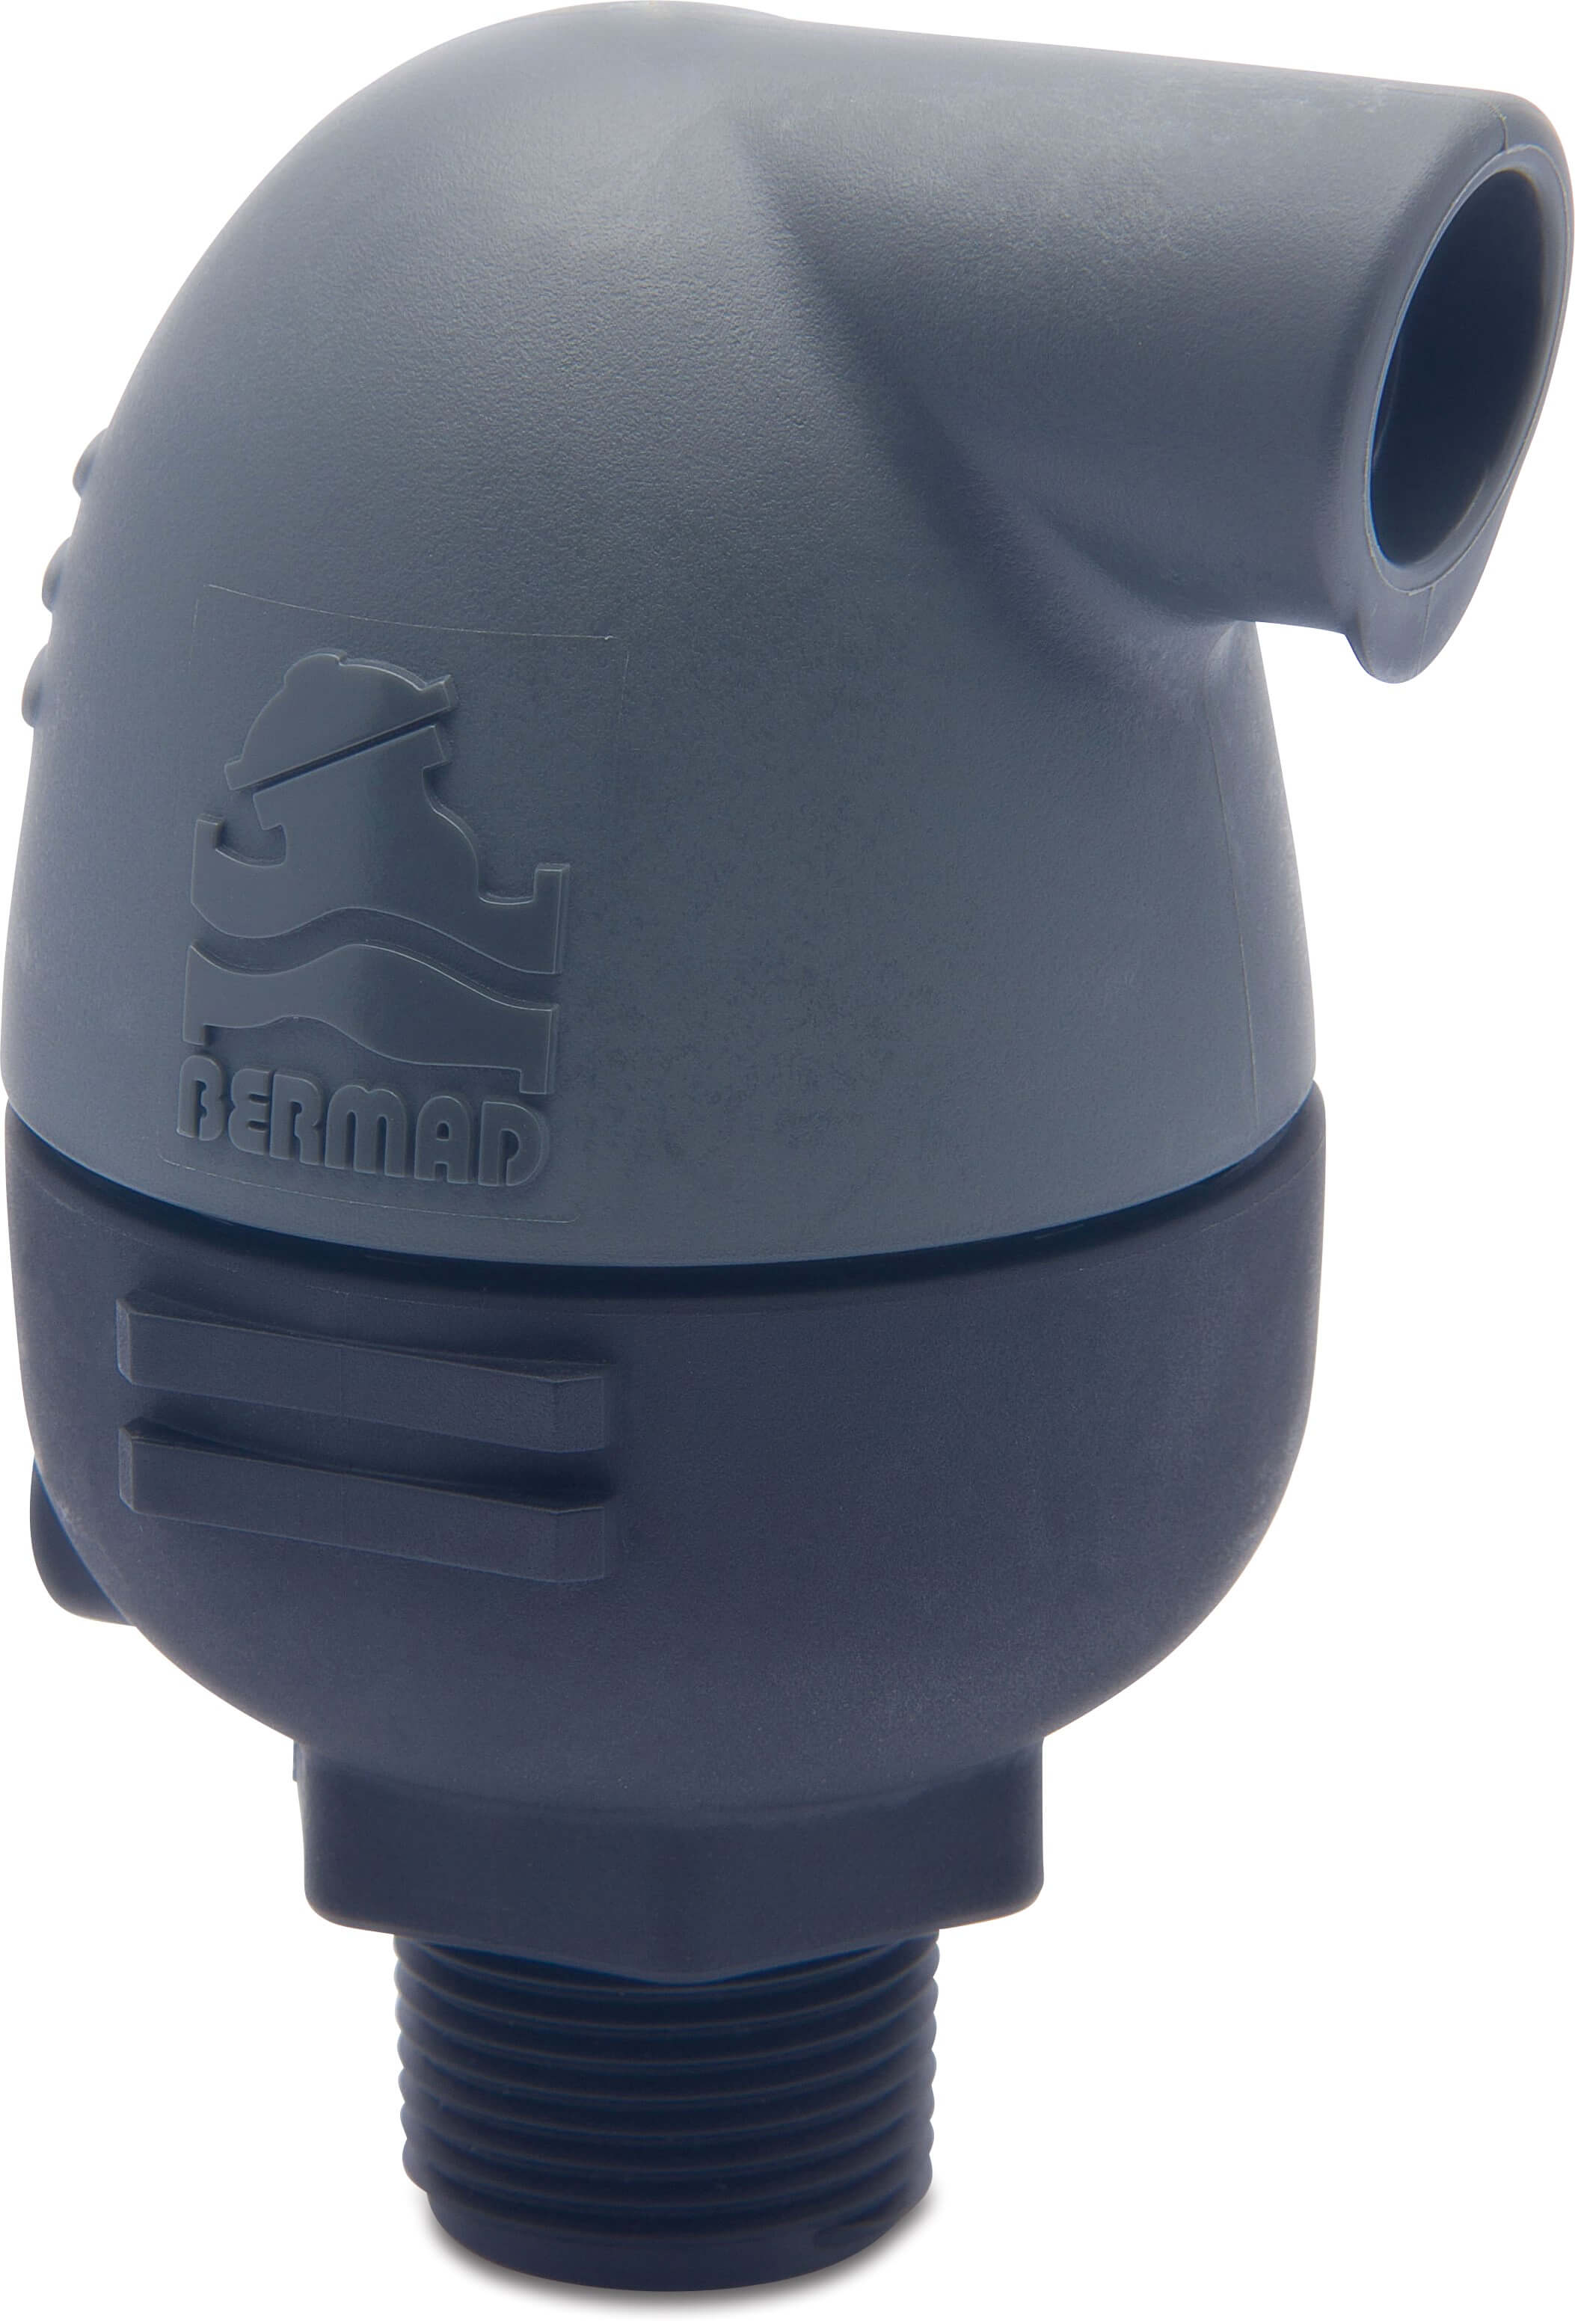 Bermad Air release- vacuum valve glass-filled nylon 1" male thread 16bar grey/black automatic type A30